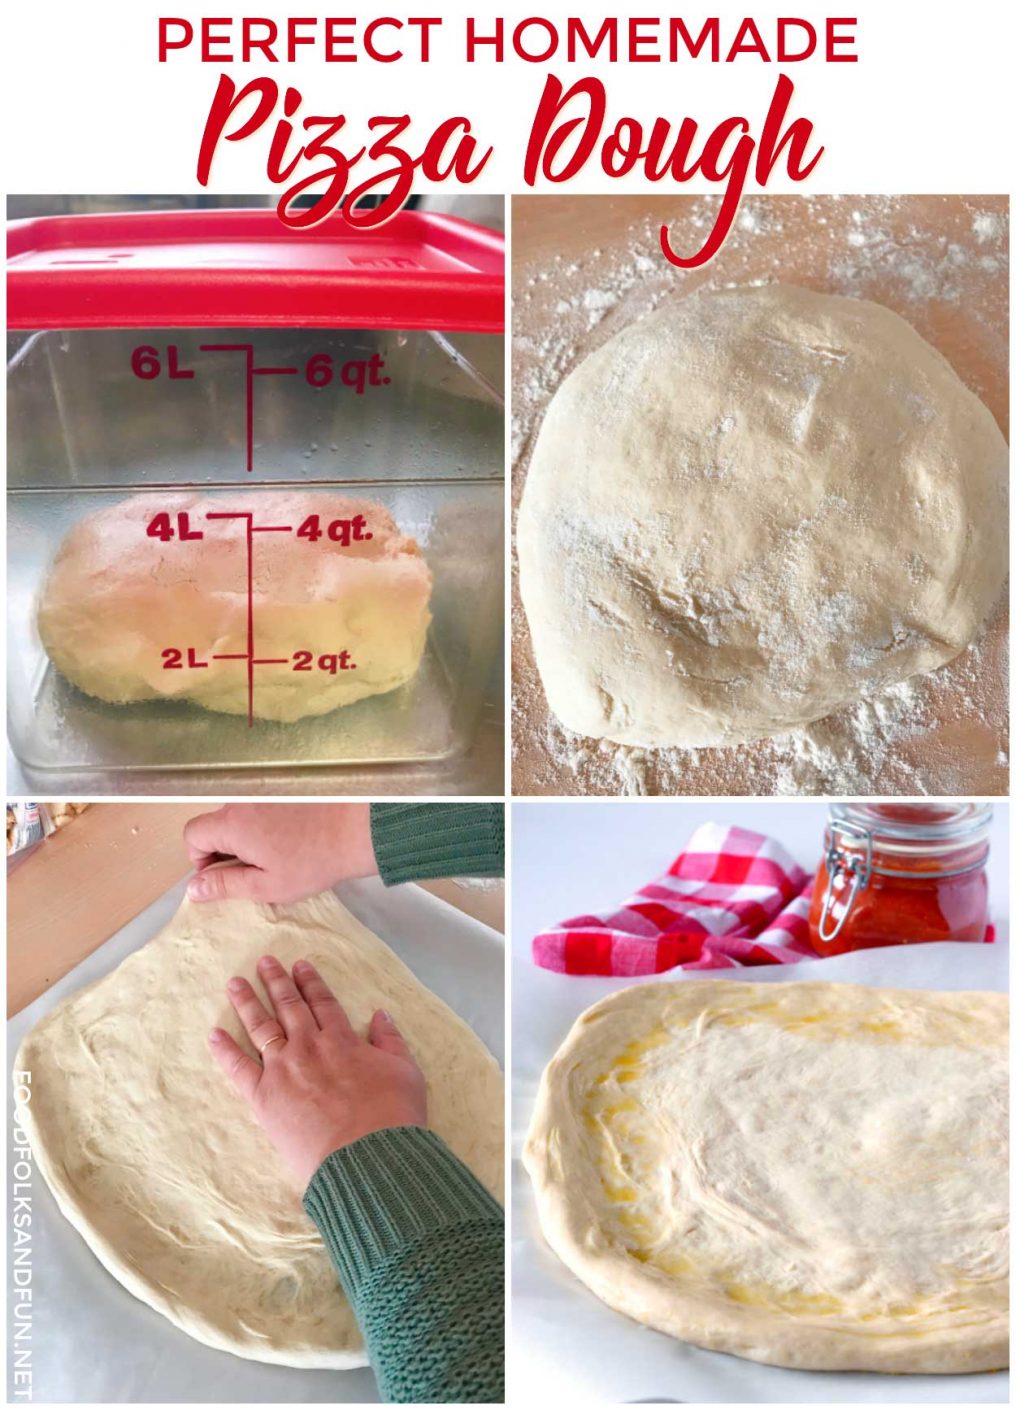 A picture collage of How to Make the Perfect Homemade Pizza Dough.